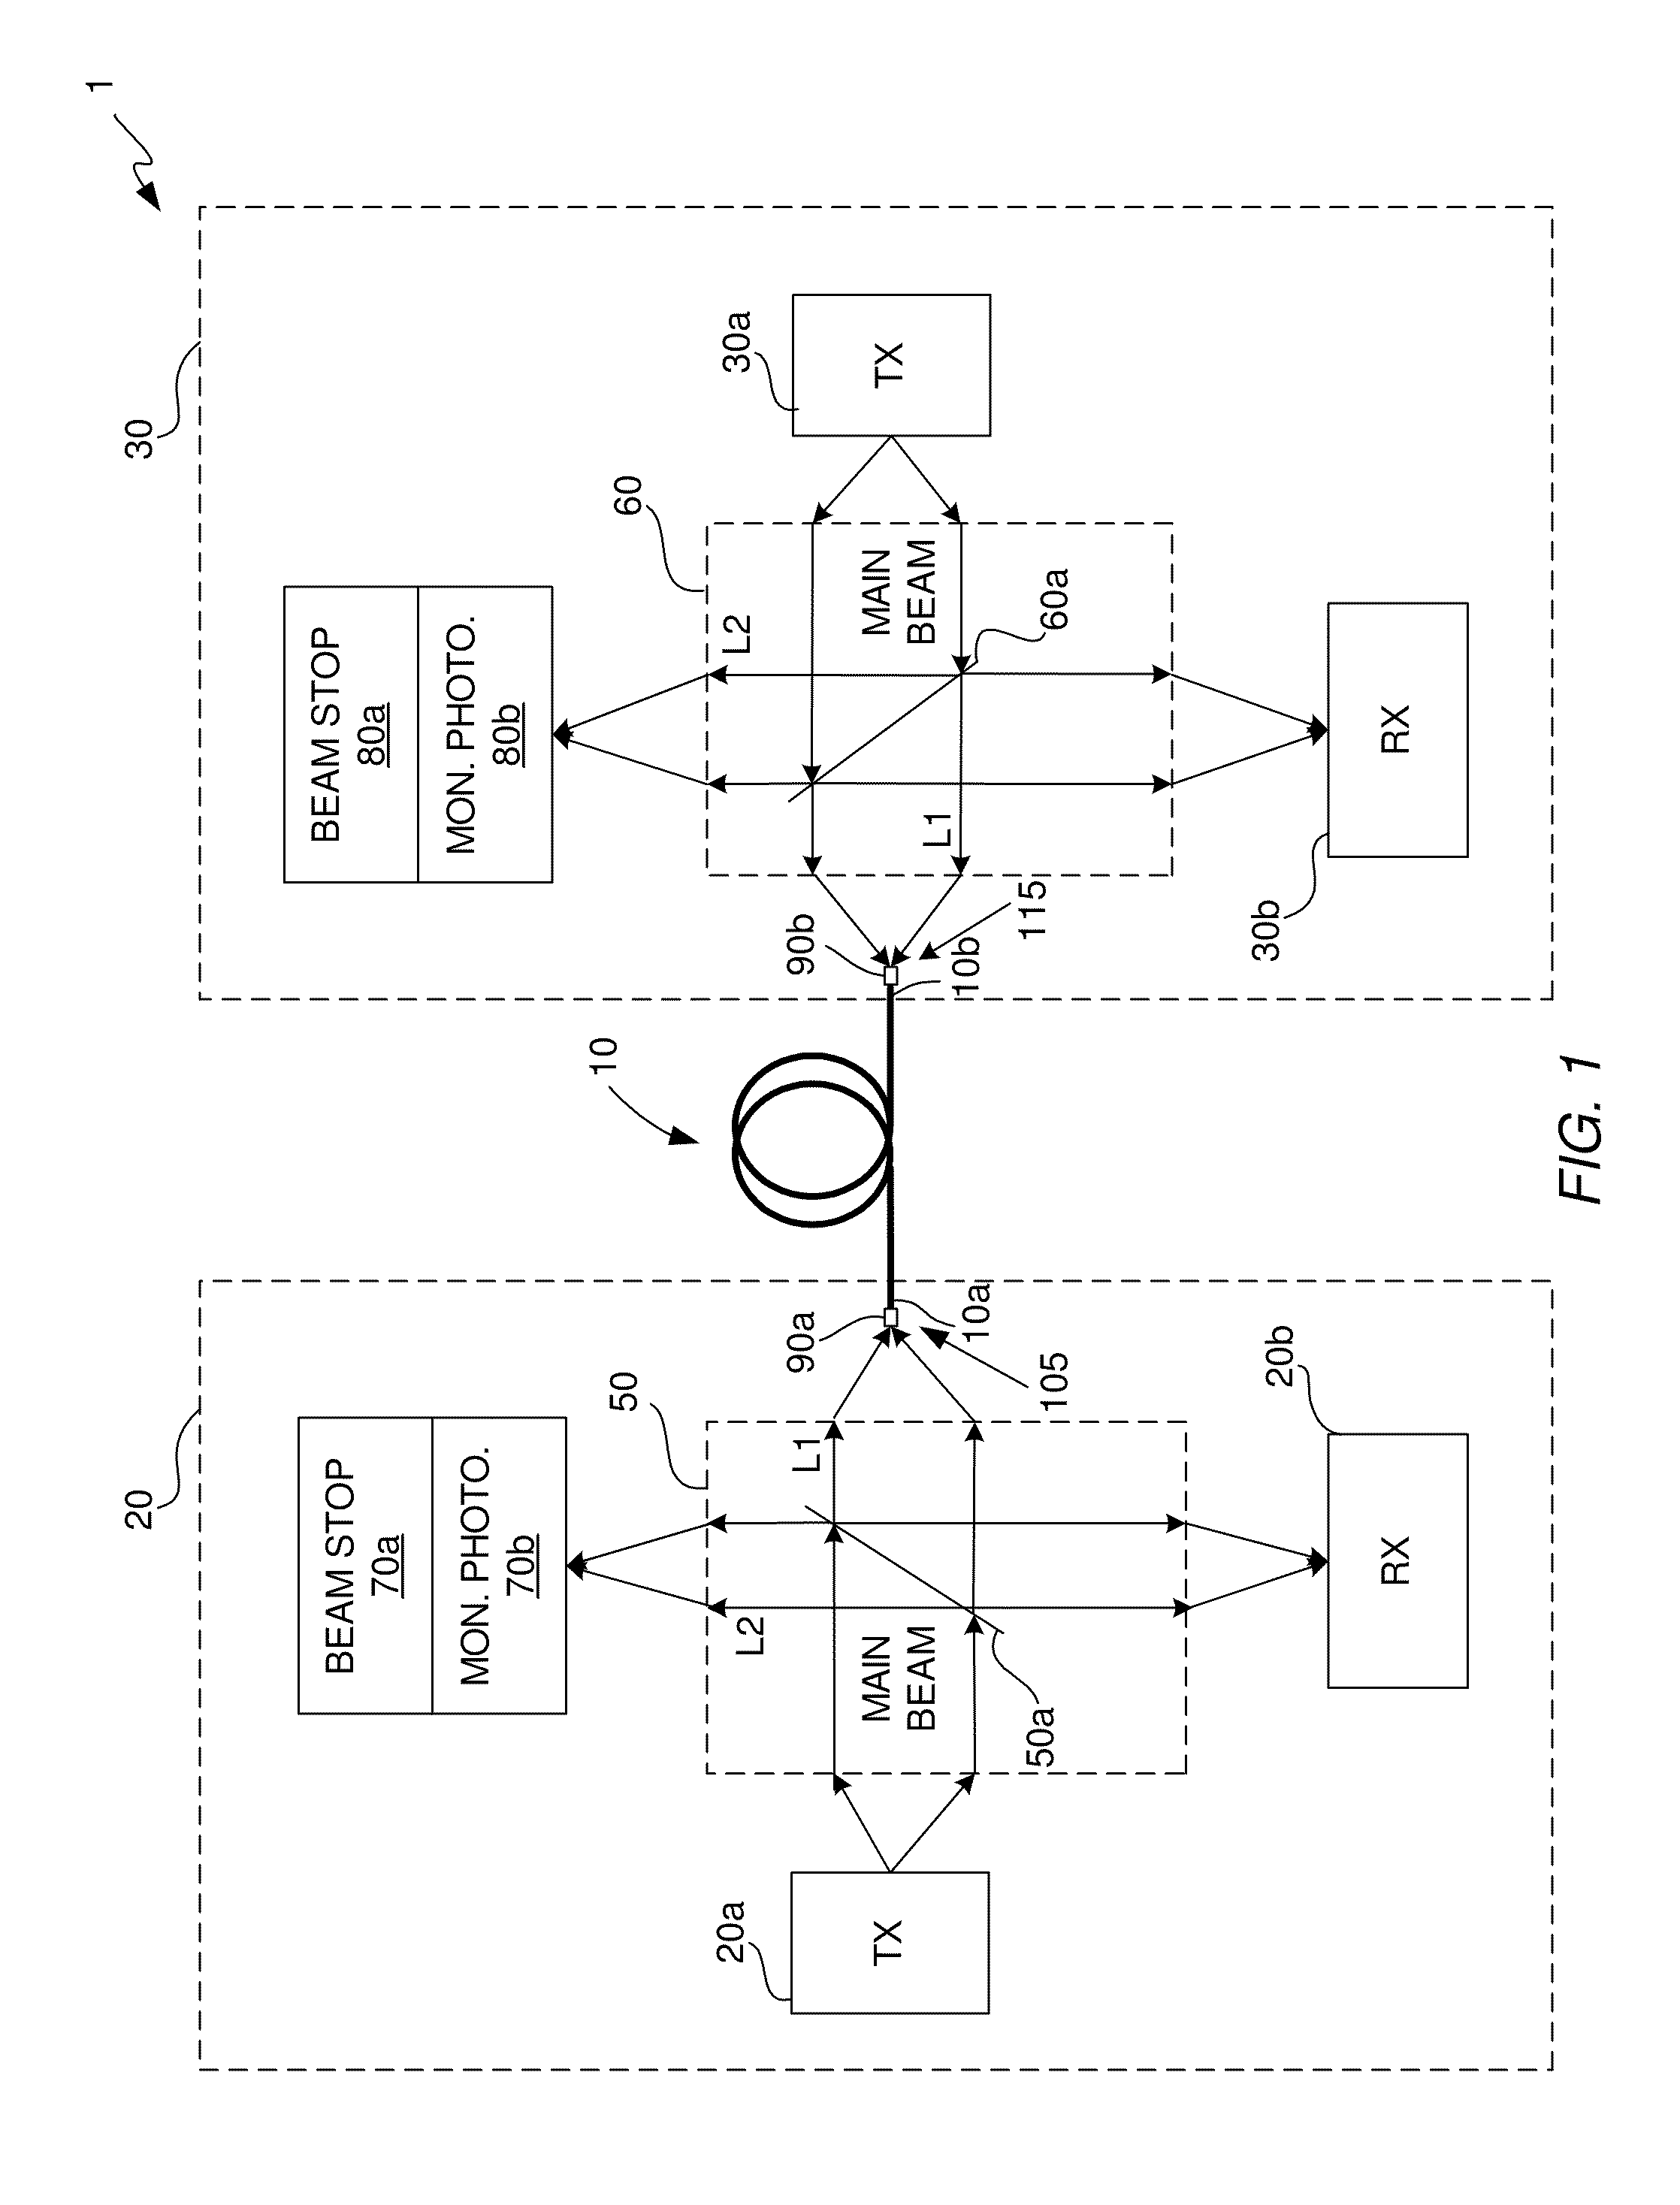 Optical beam splitter for use in an optoelectronic module, and a method for performing optical beam splitting in an optoelectronic module